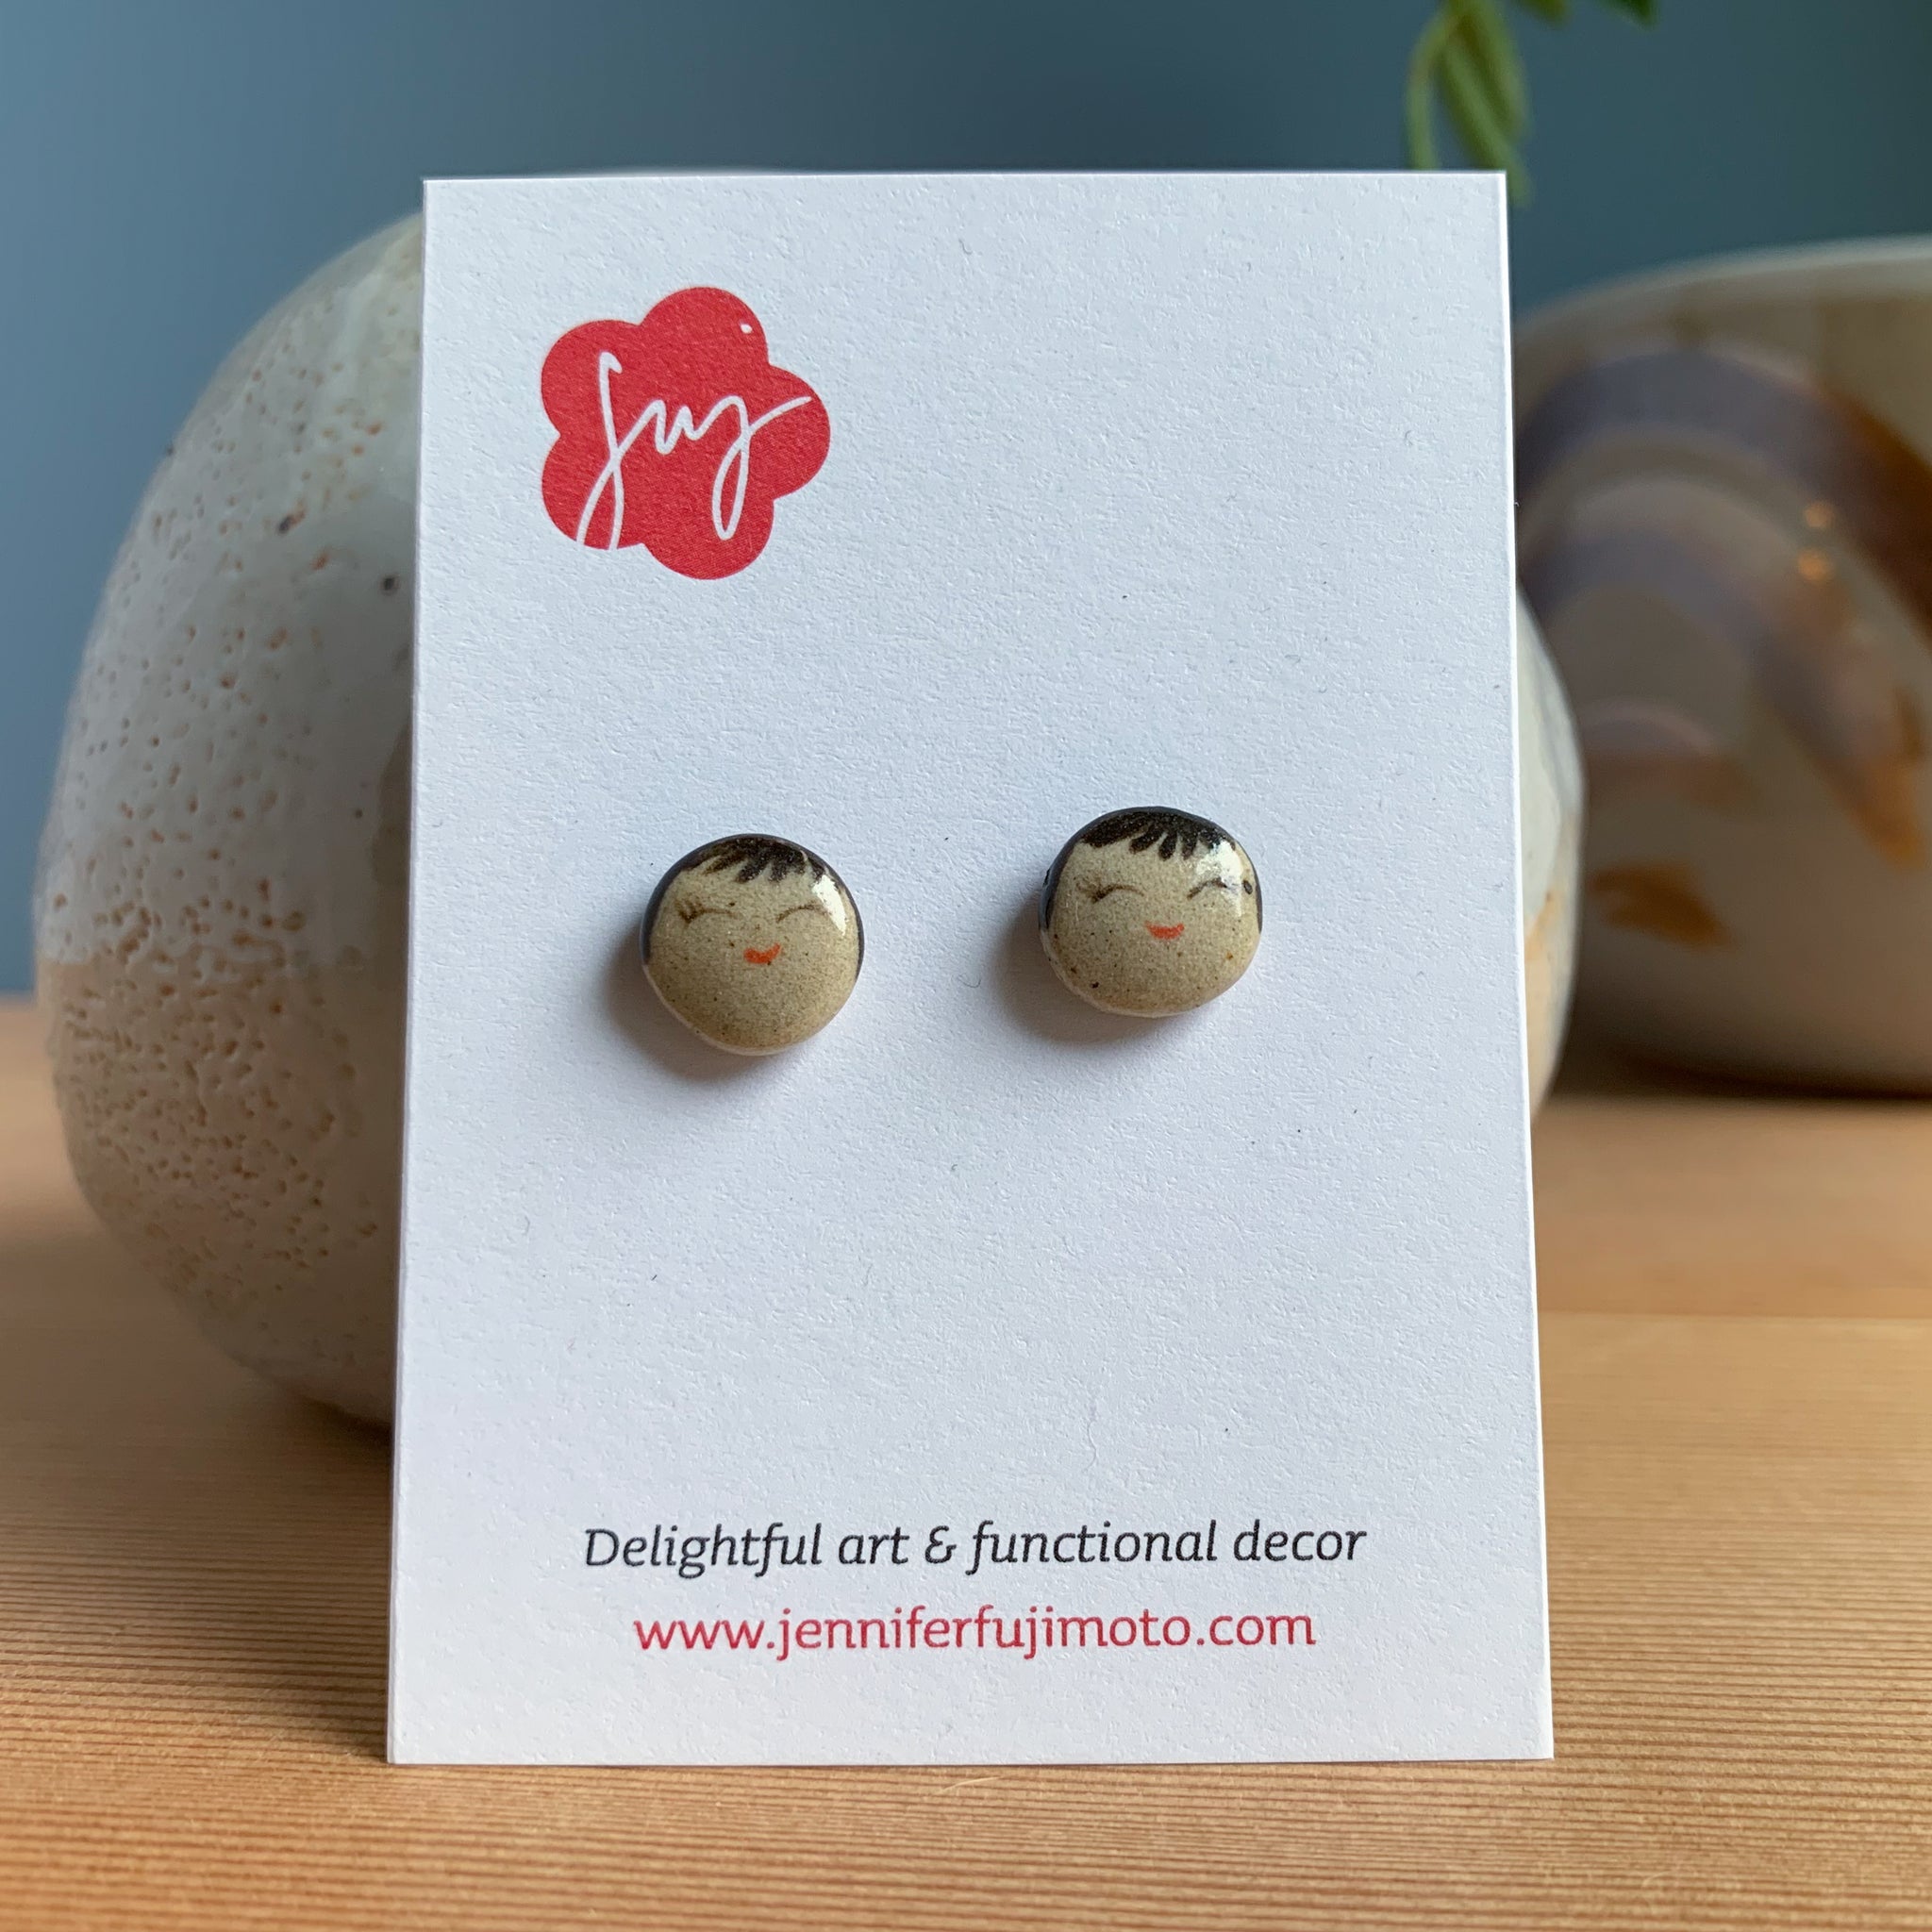 Ceramic earrings with cheerful expression on a backing card